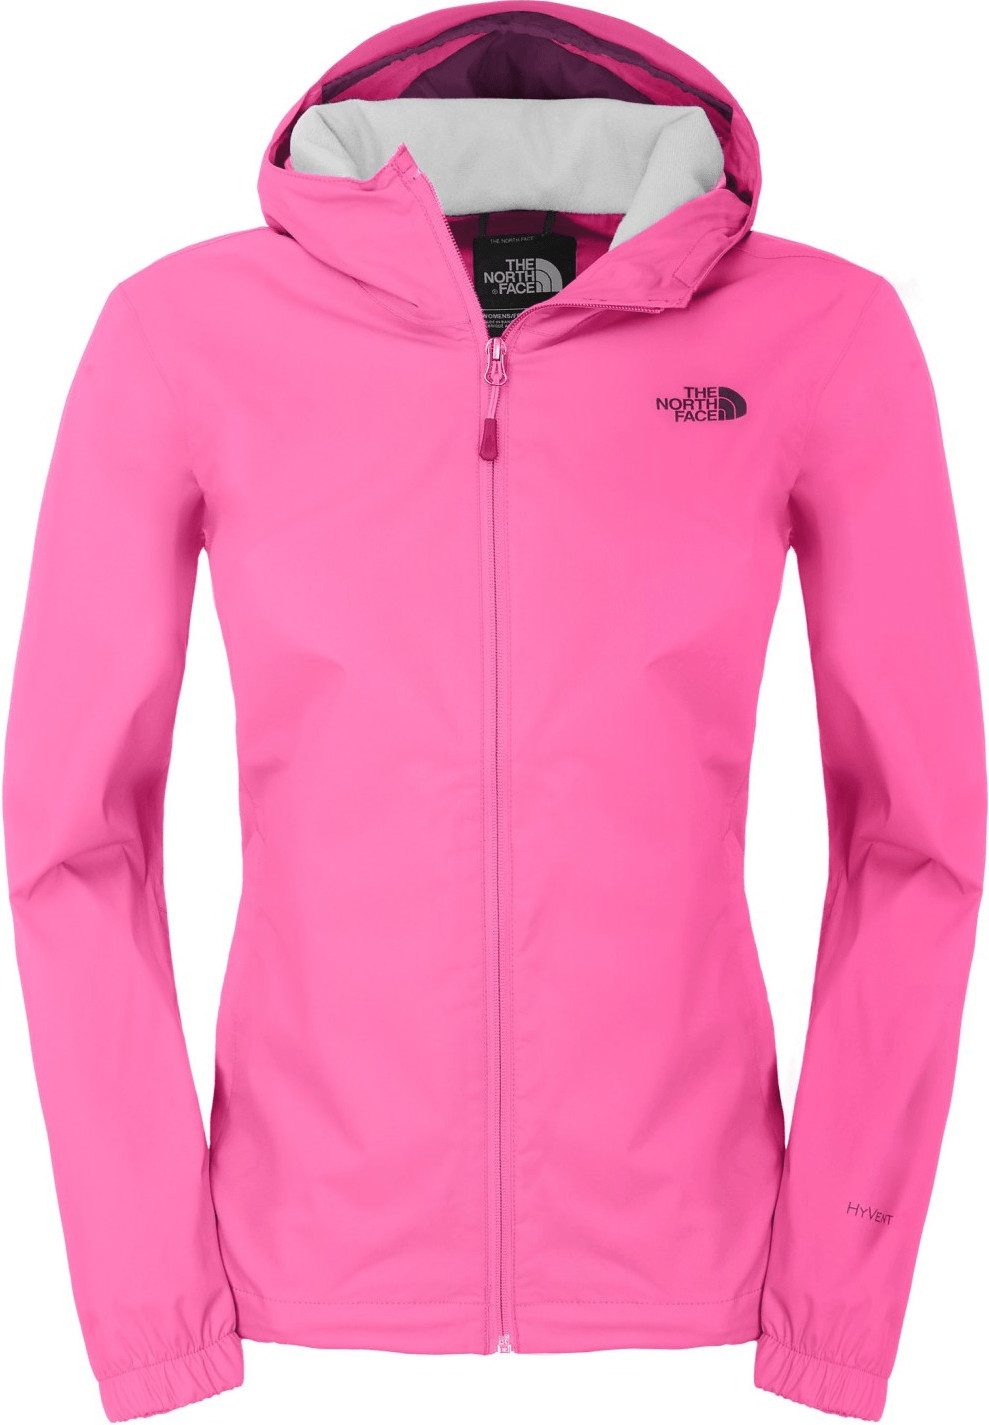 Buy The North Face Women Quest Jacket rose violet pink from £69.31 ...